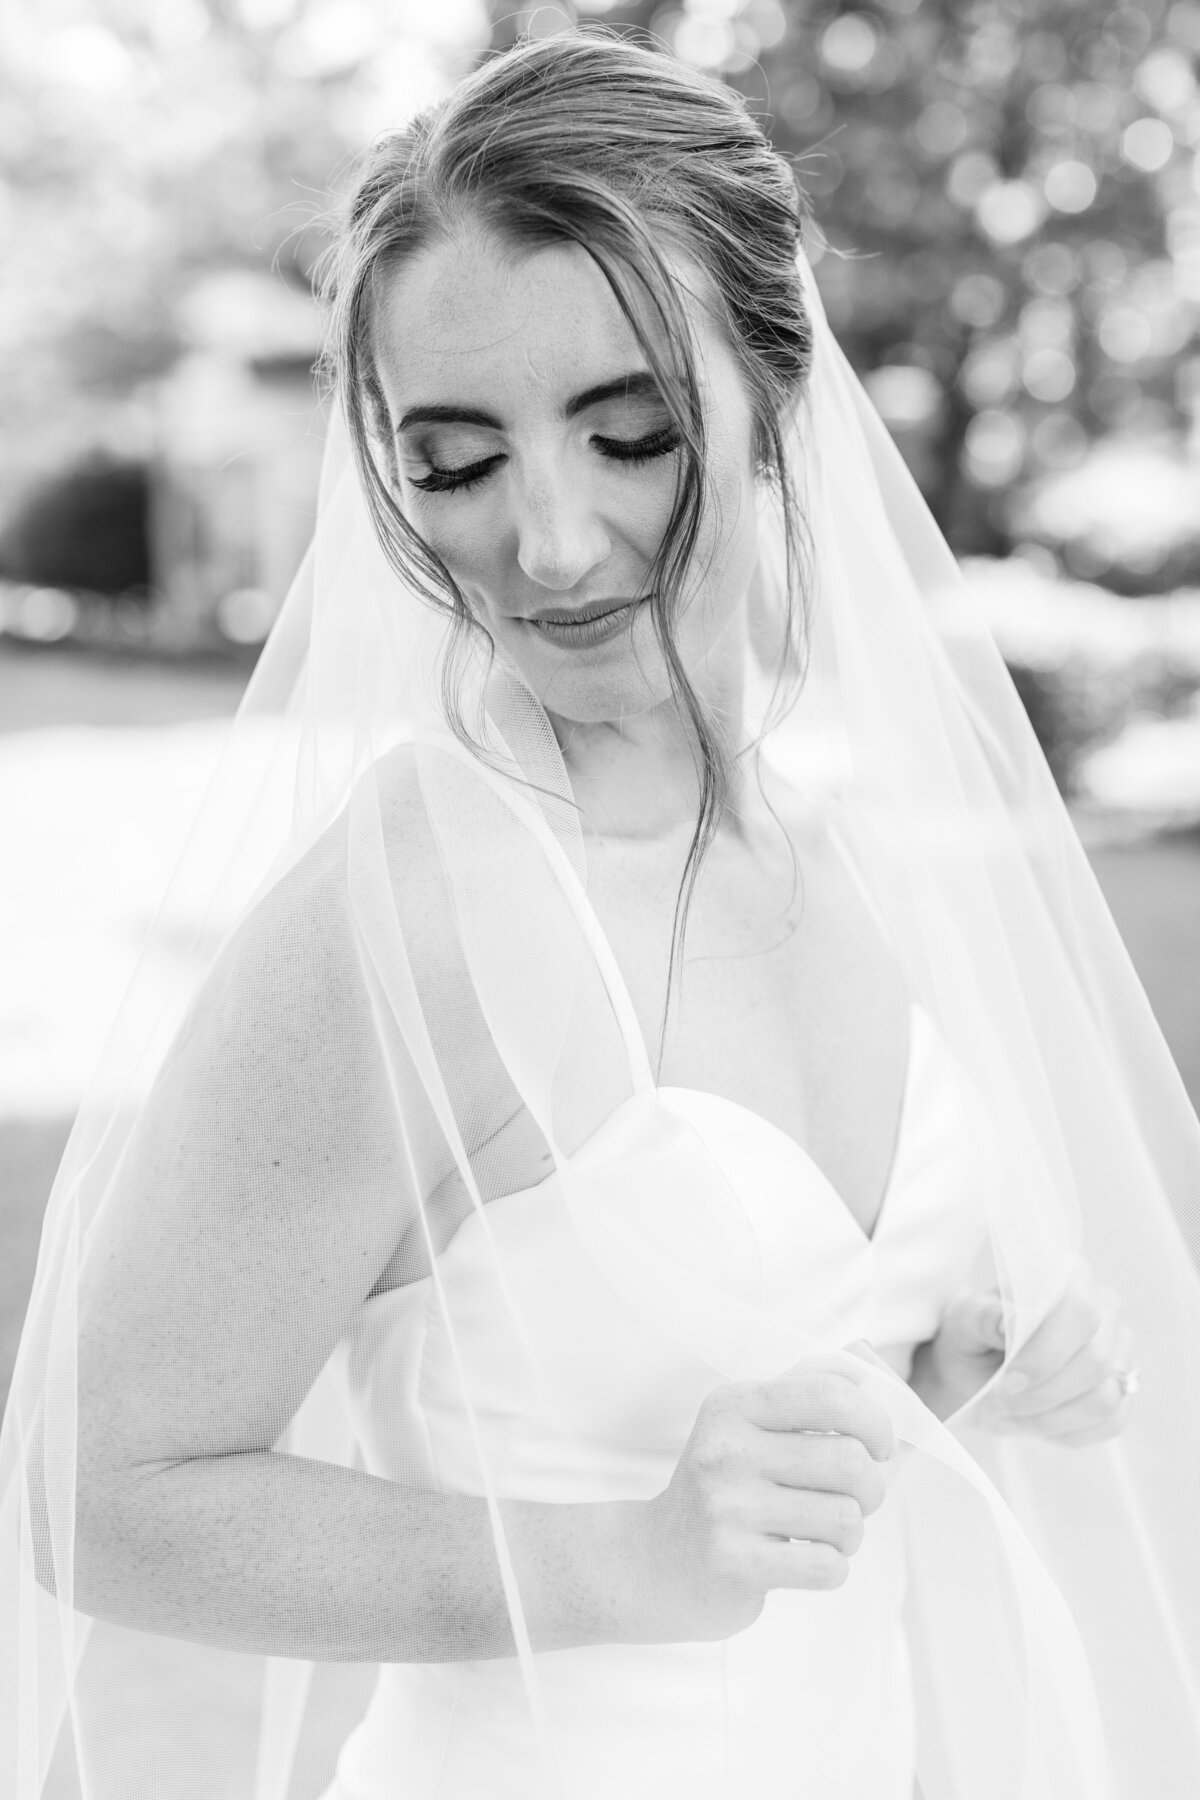 A bride wraps herself in the veil while looking down.